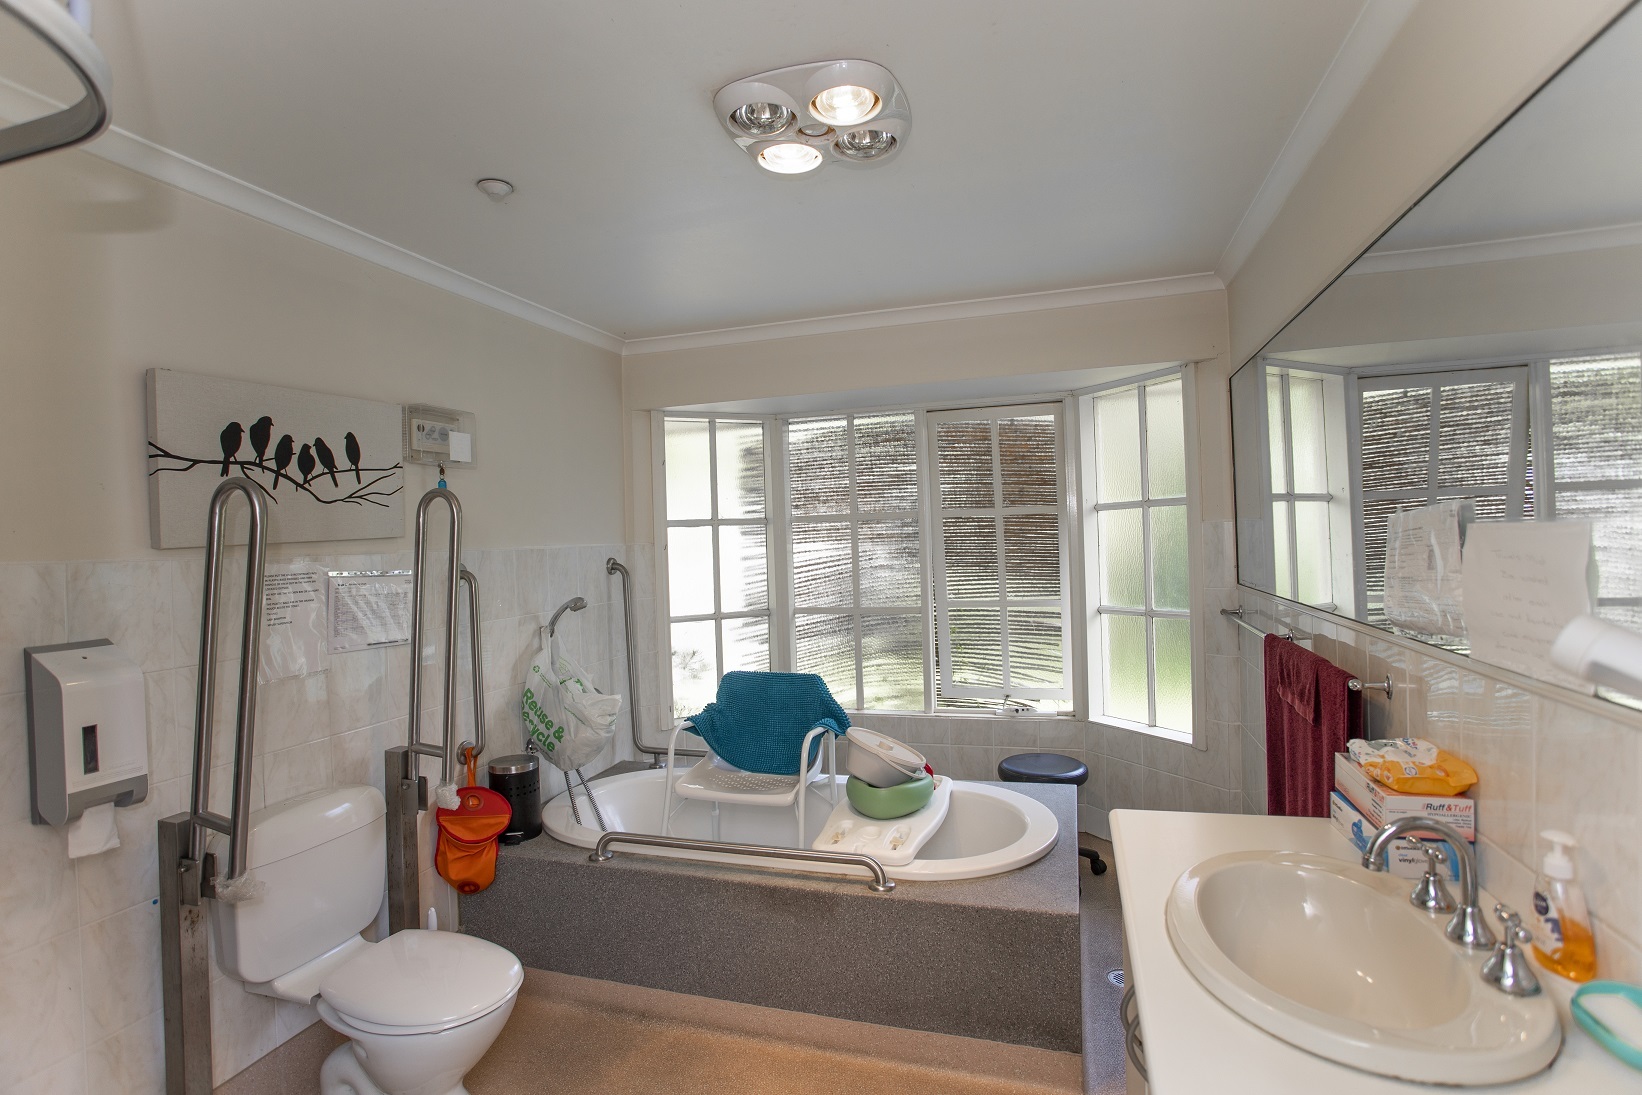 Well lit bathroom with bath and toilet that have grab rails